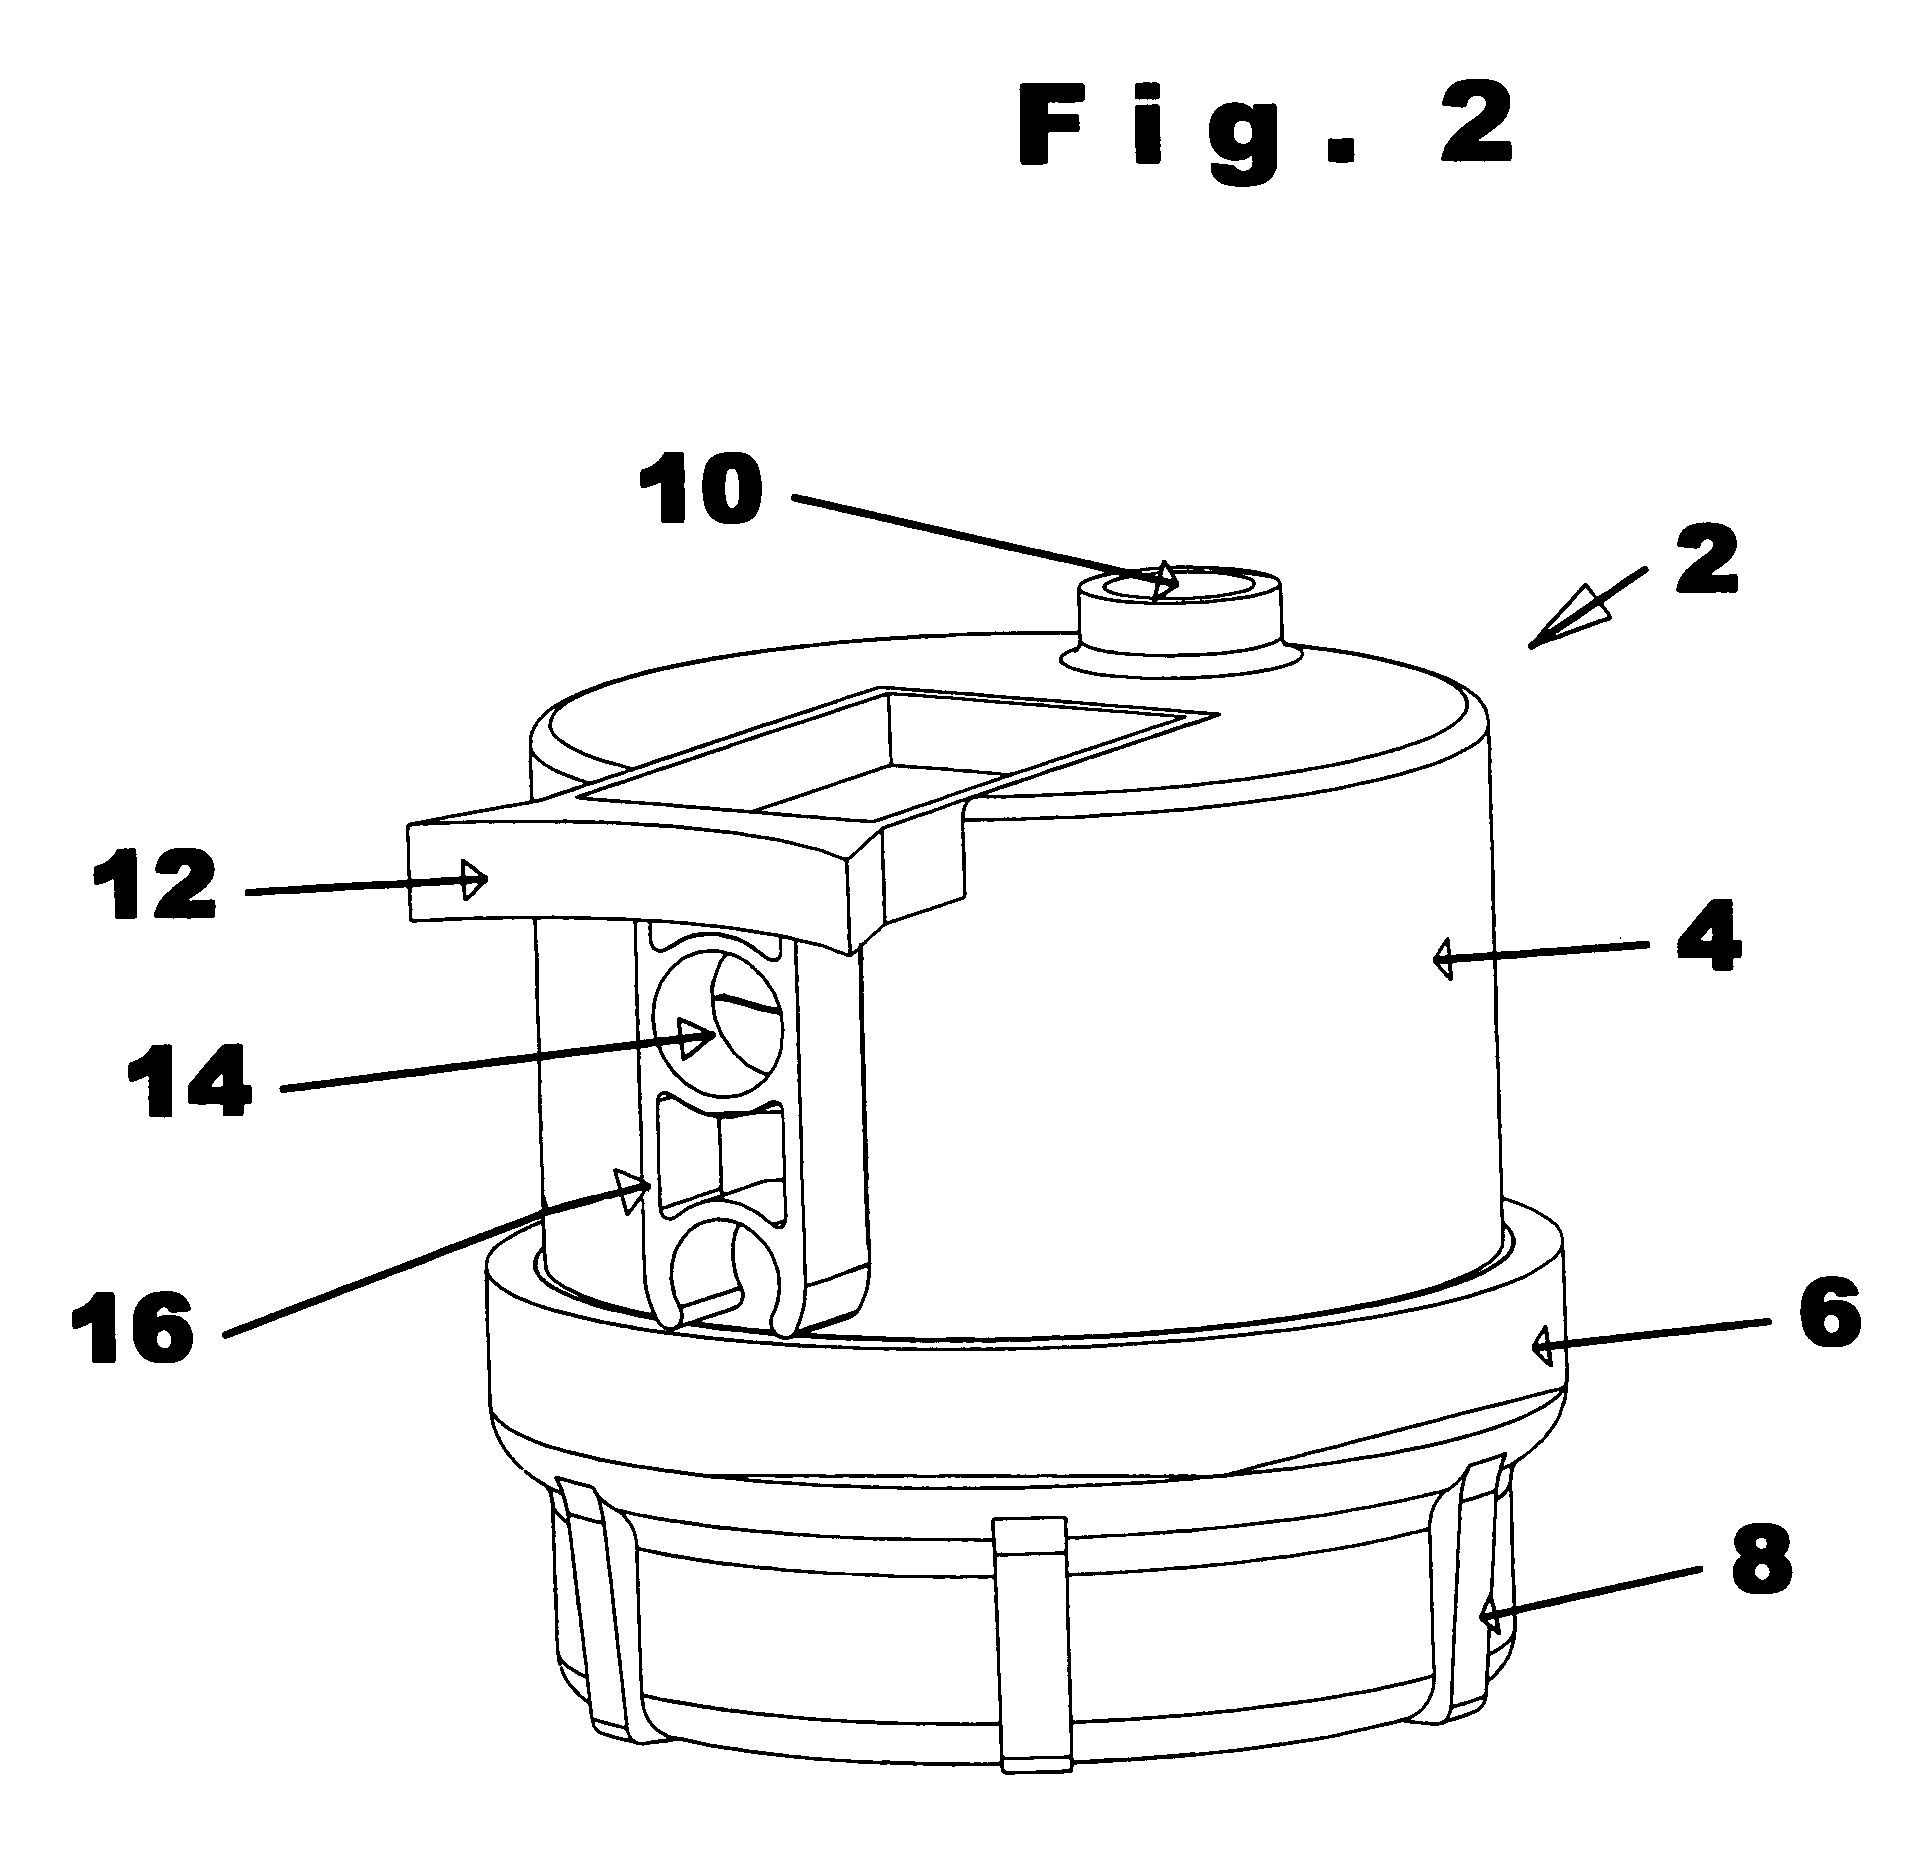 Filter assembly for gravity-assisted air conditioner discharge water saver systems